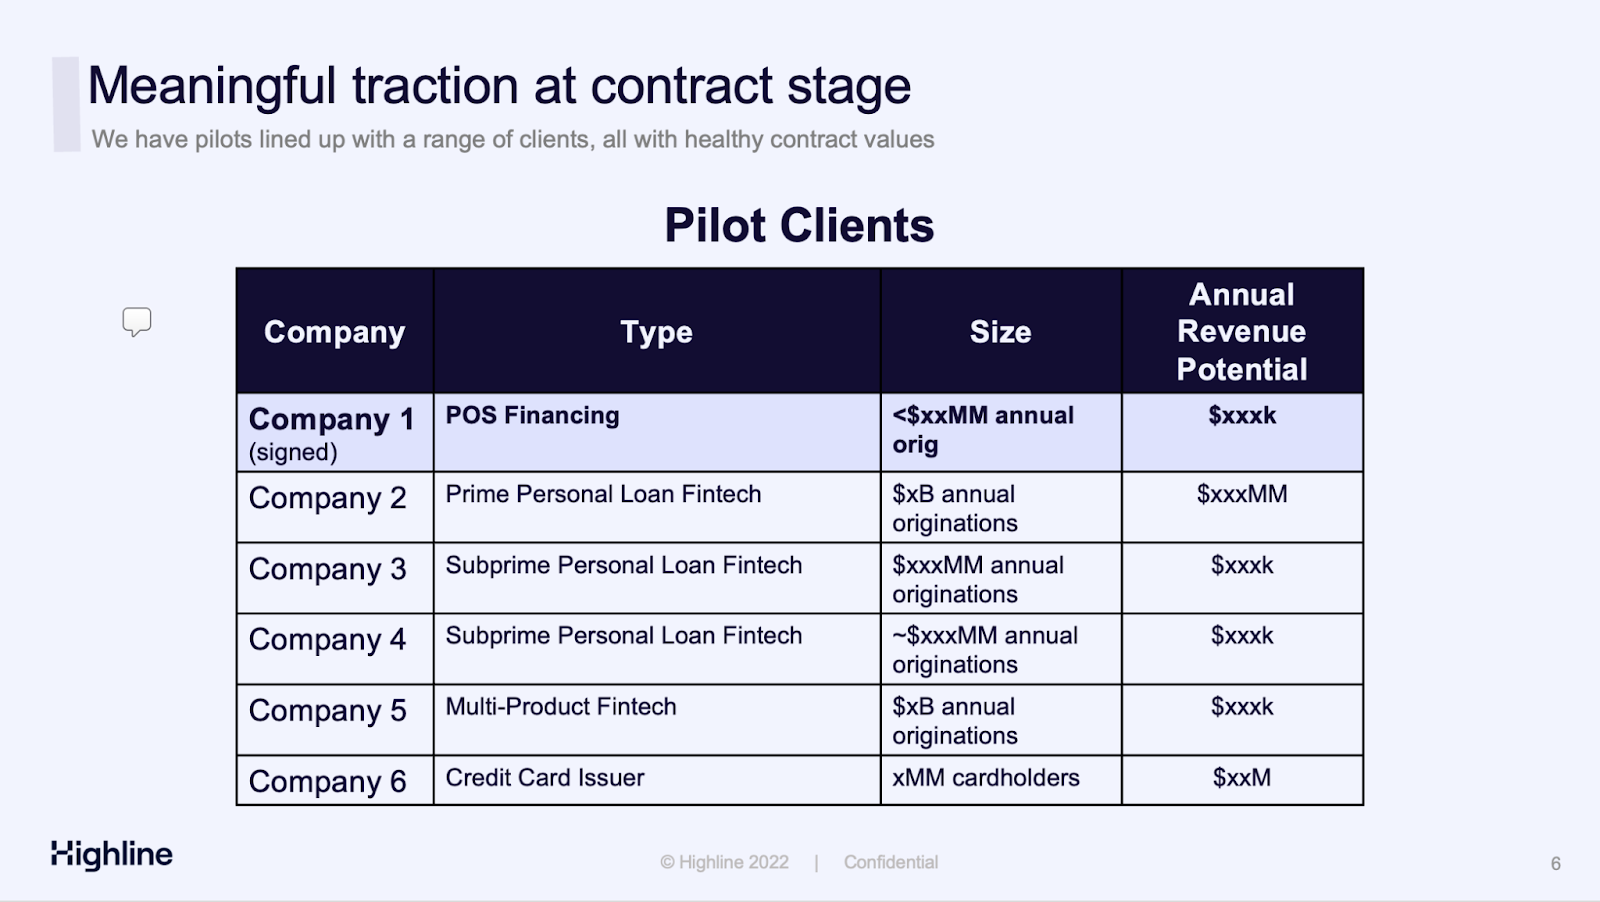 Meaningful traction at contract stage